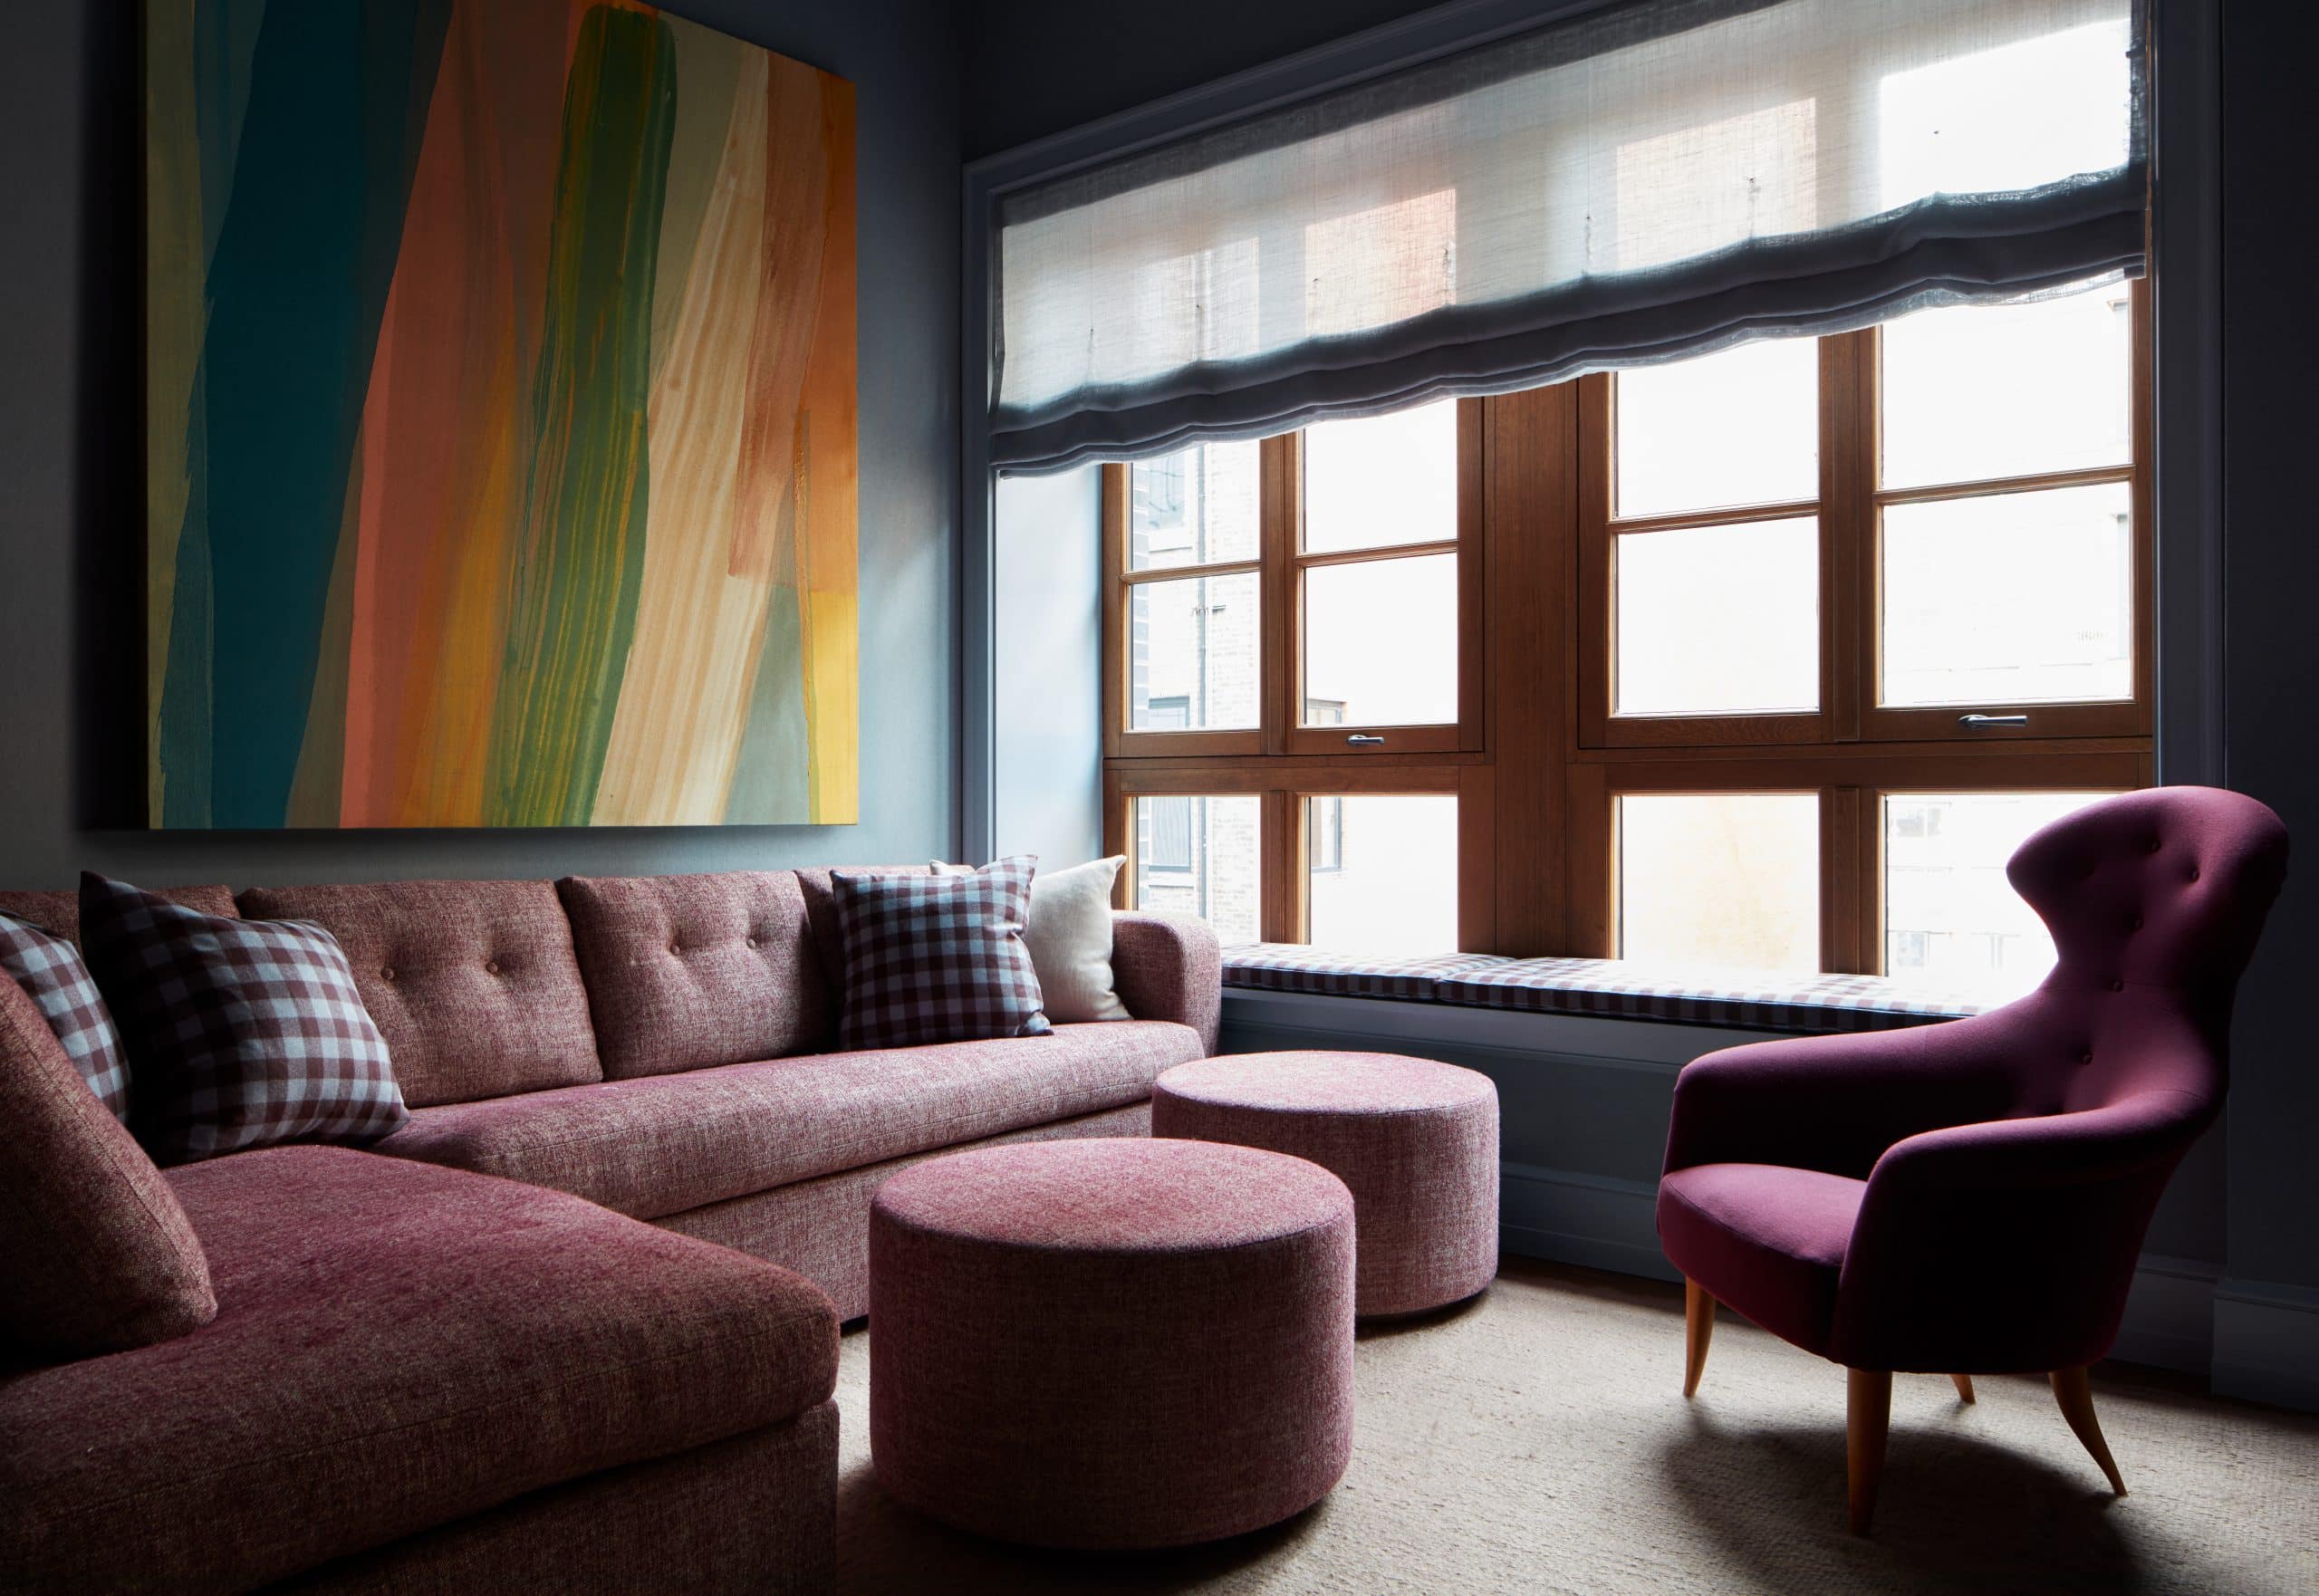 Den family room of apartment in Fitzroy building in New York City by interior designer Shawn Henderson